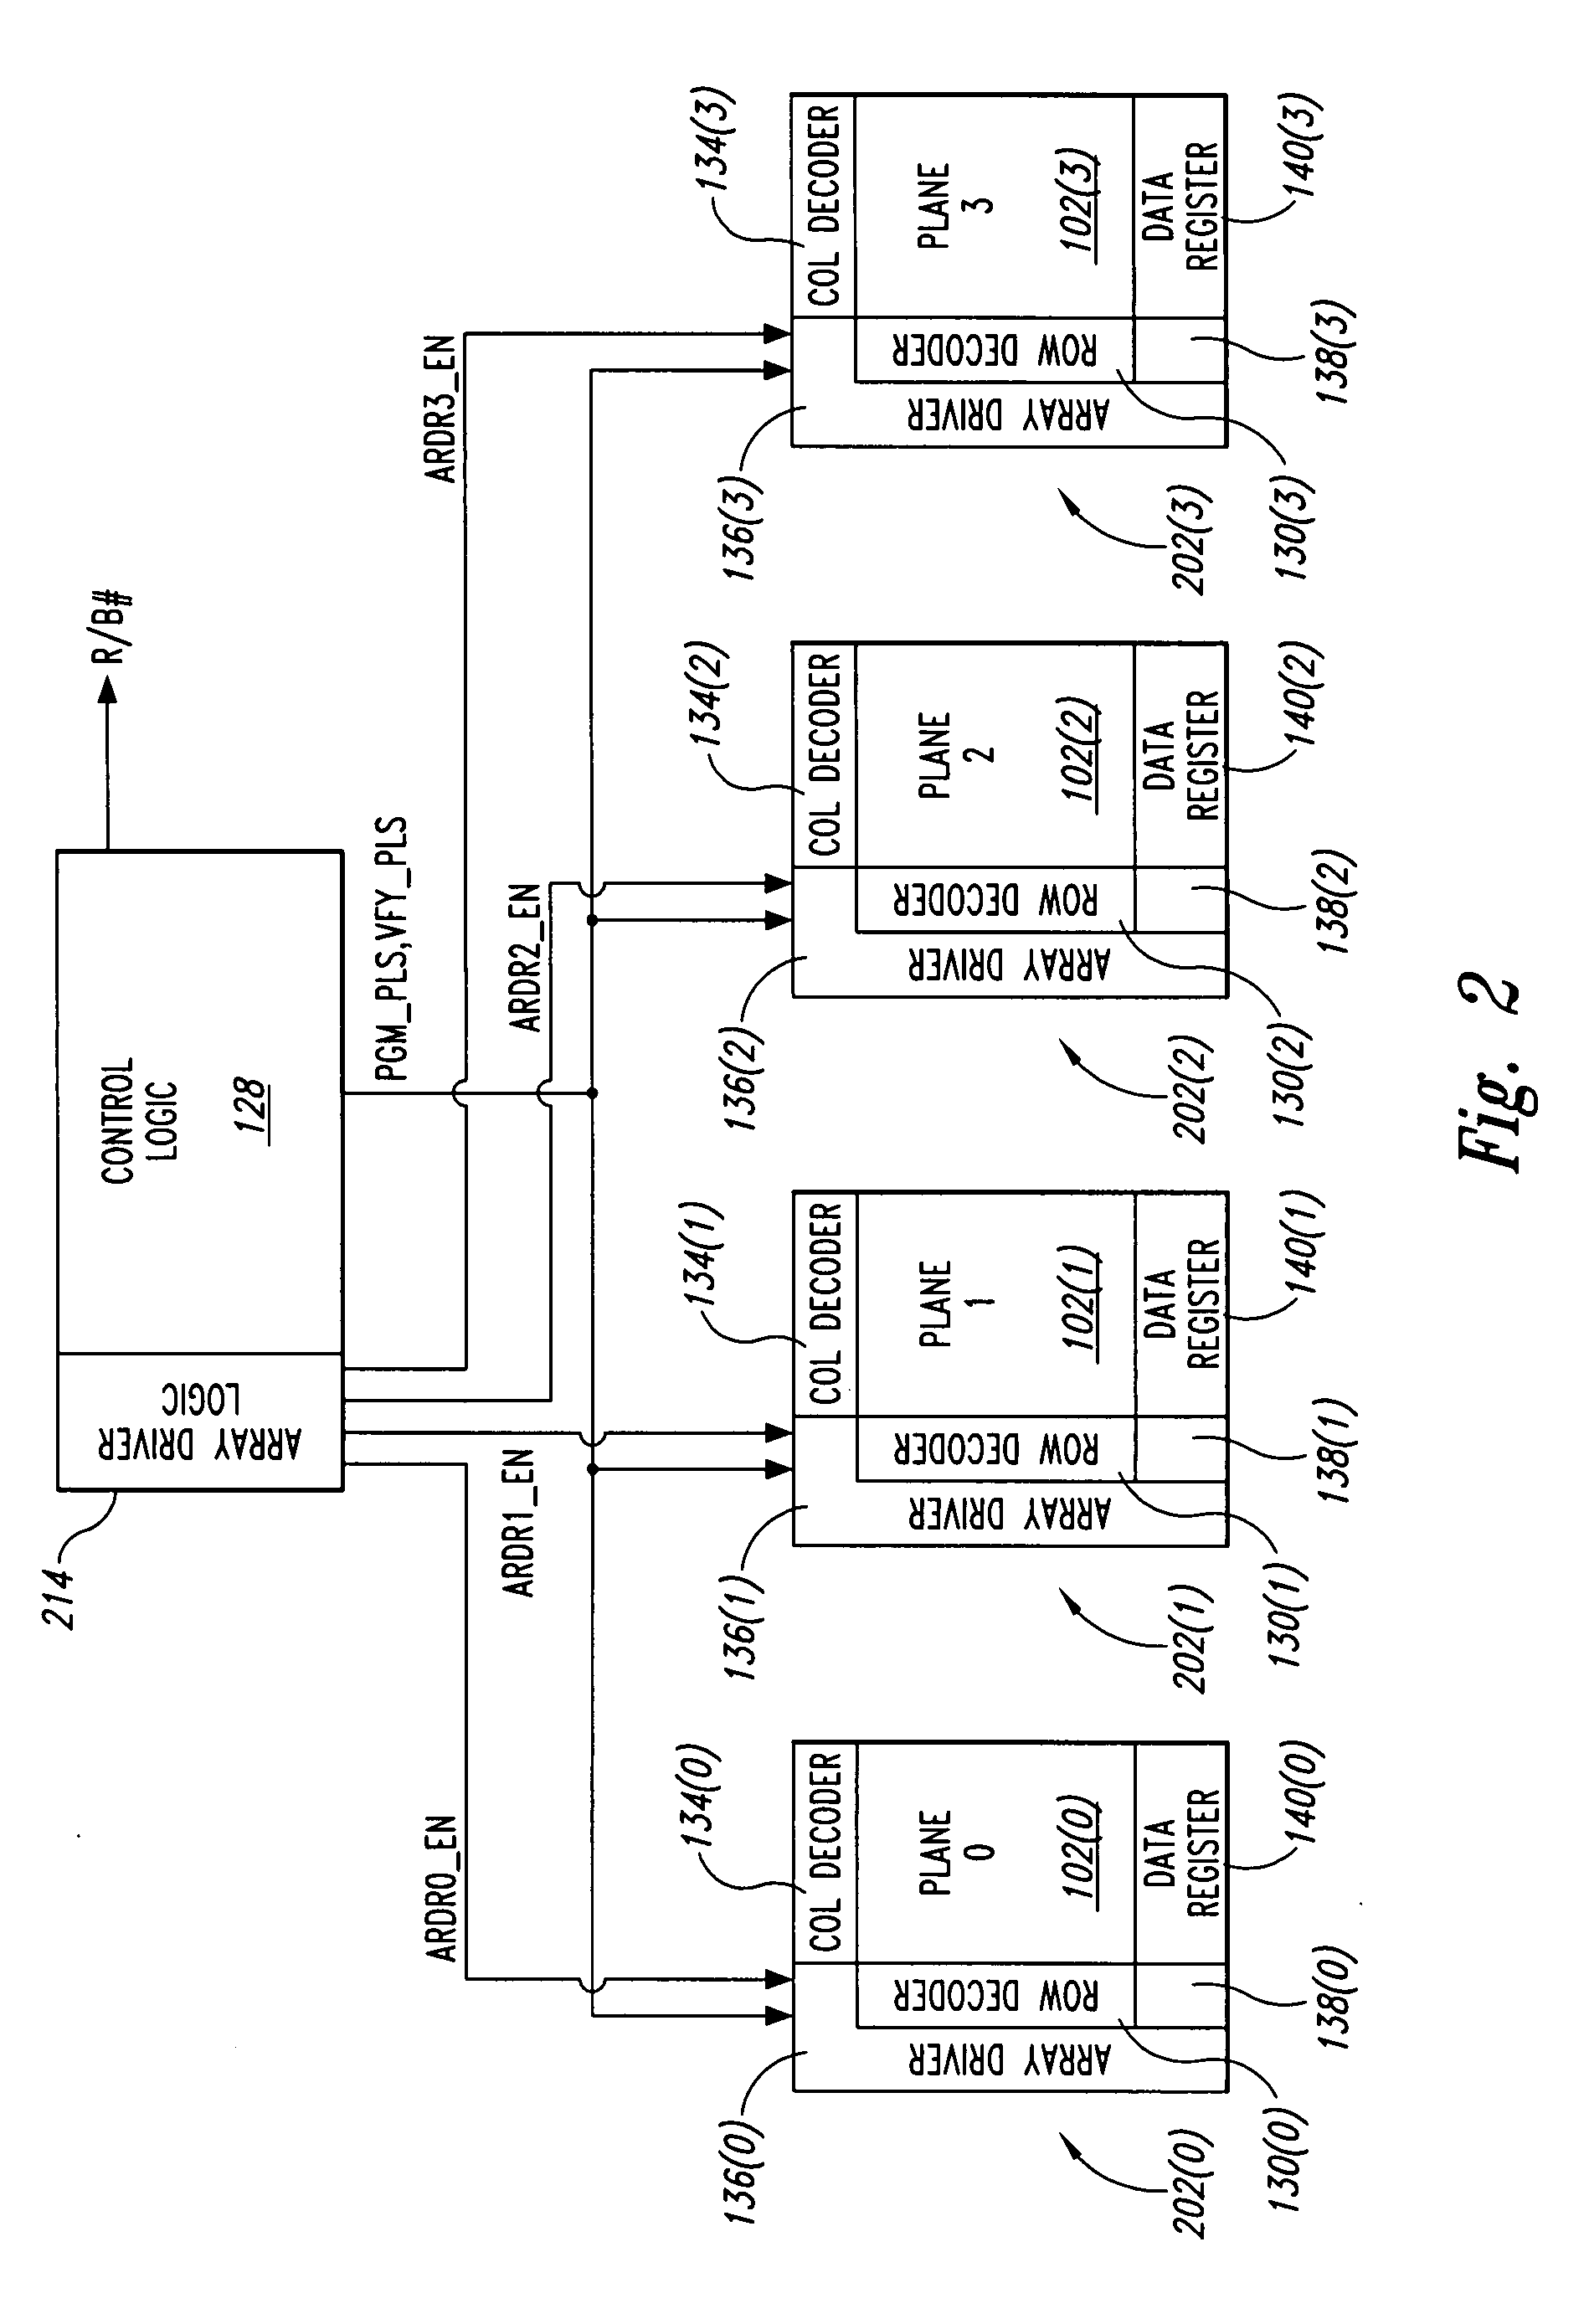 System and memory for sequential multi-plane page memory operations